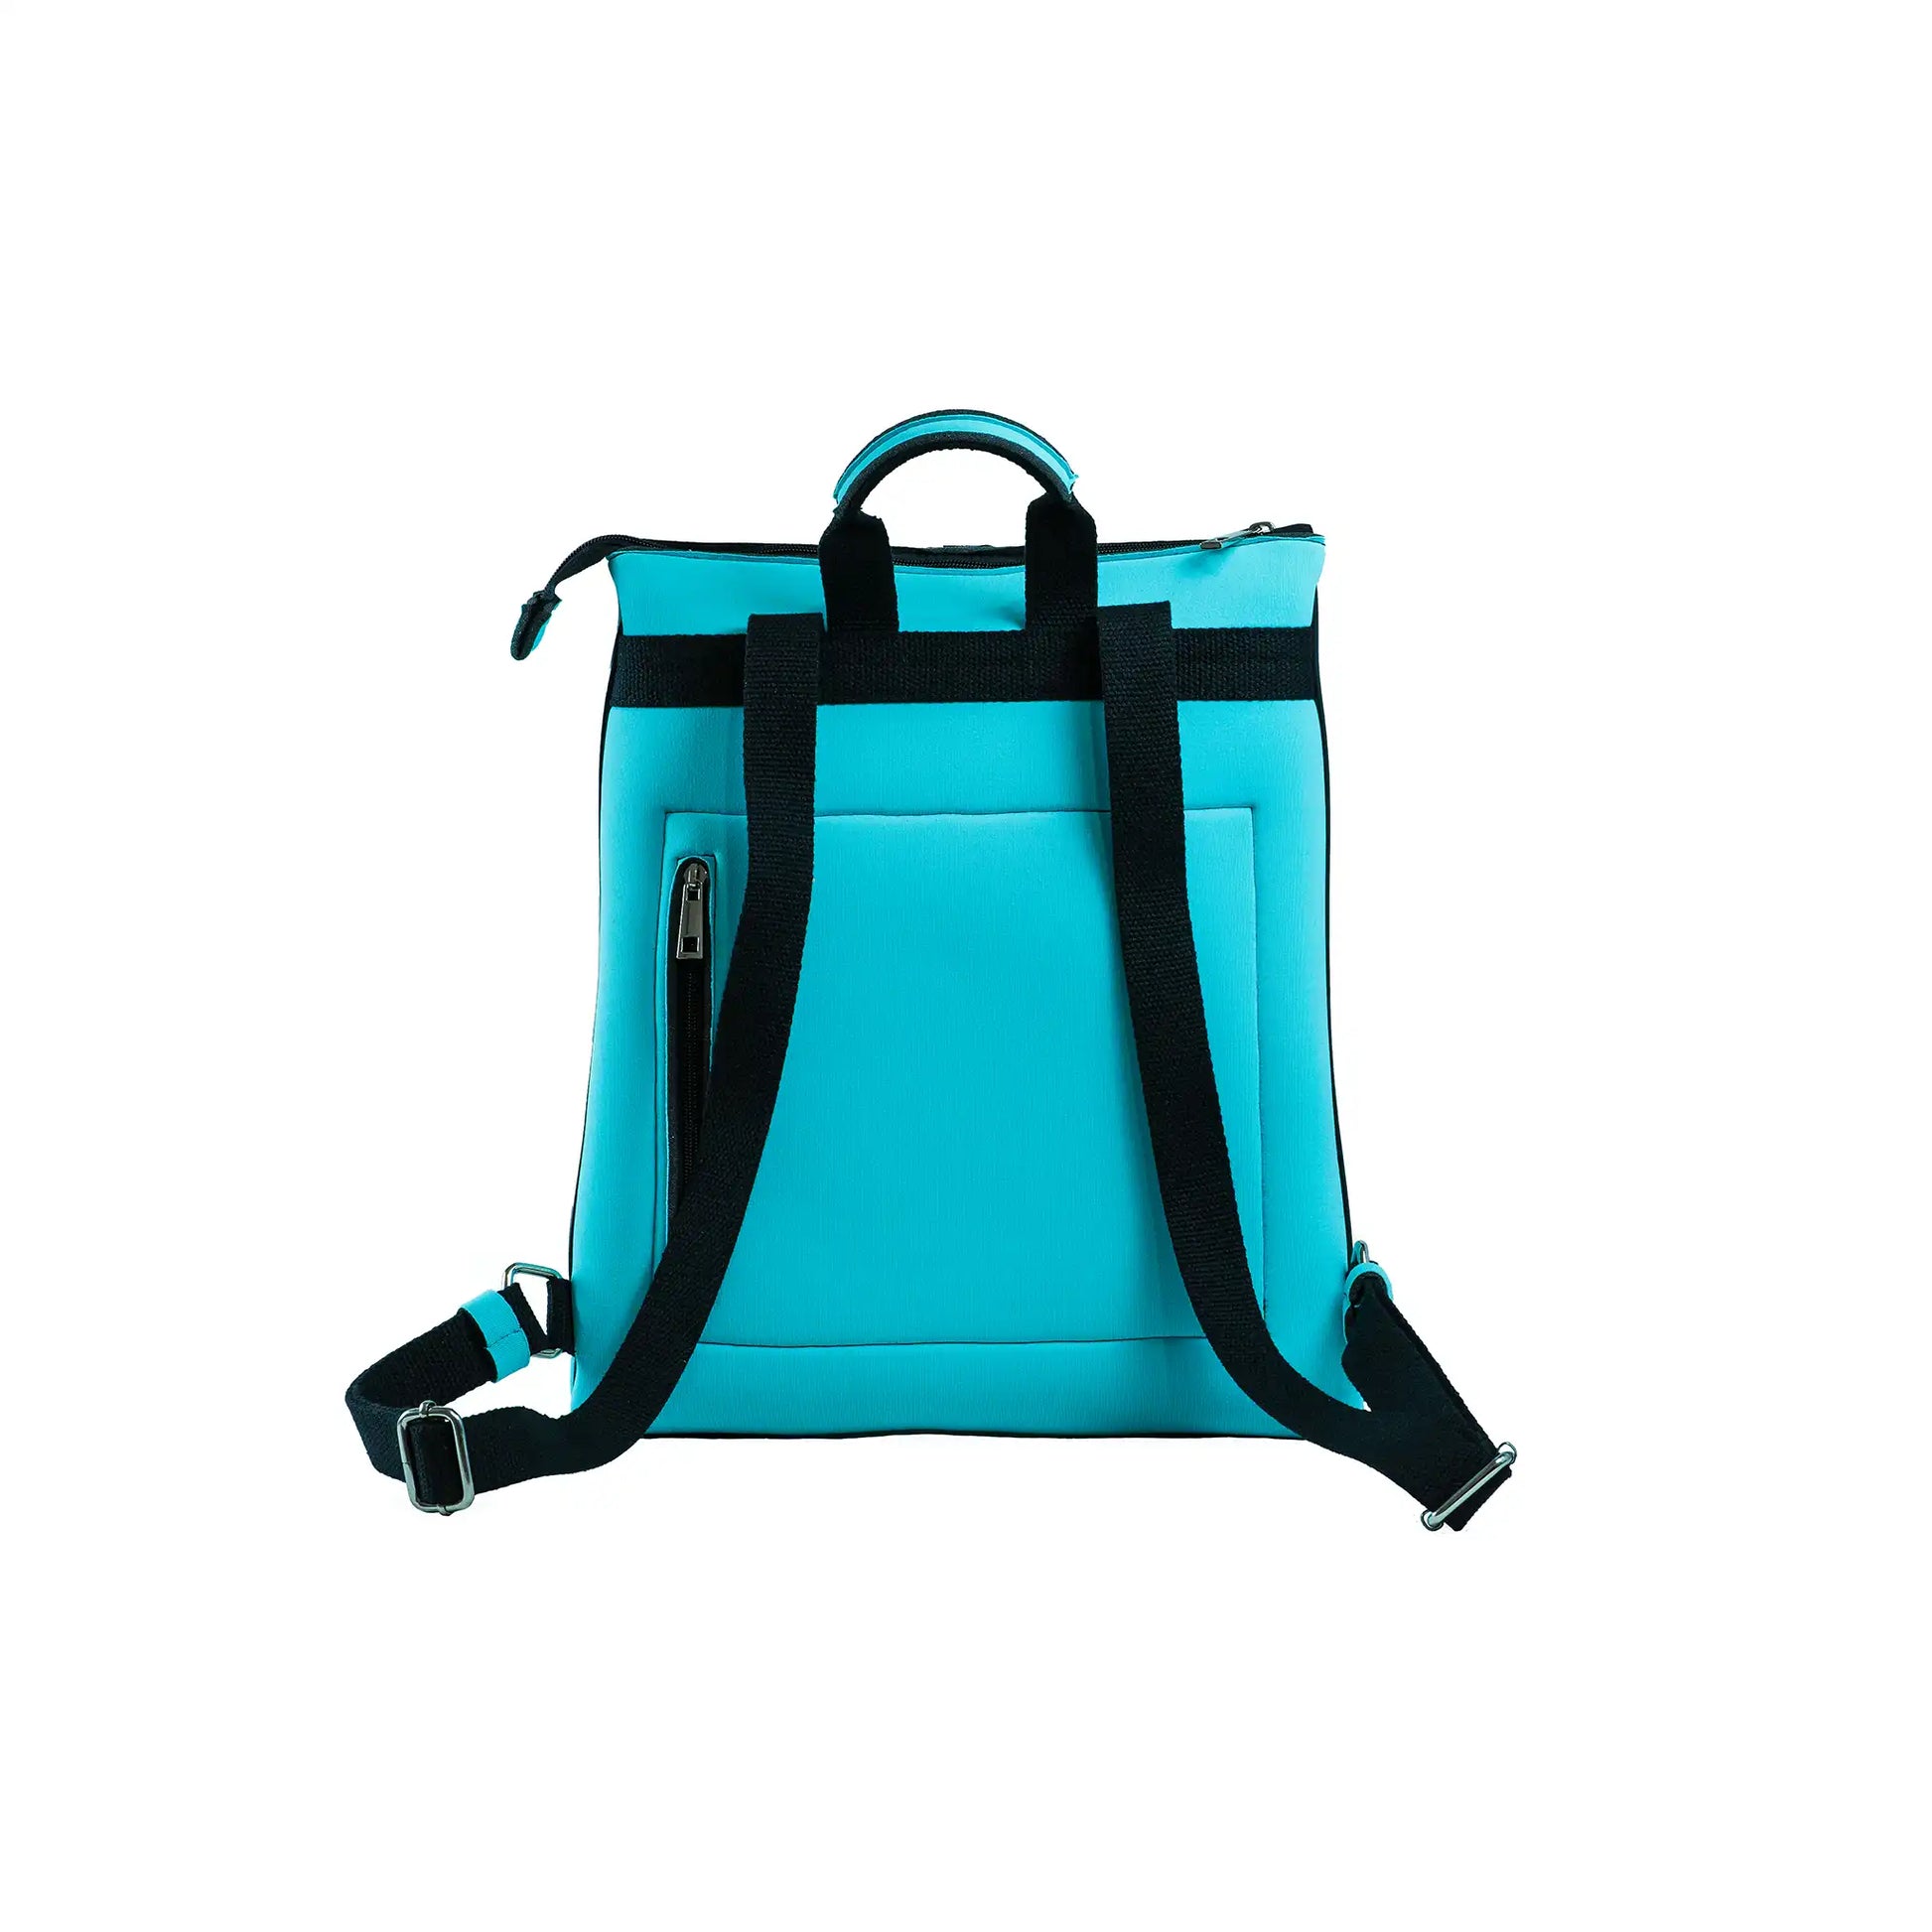 Zainetto Donna Ours Bag (Tiffany)